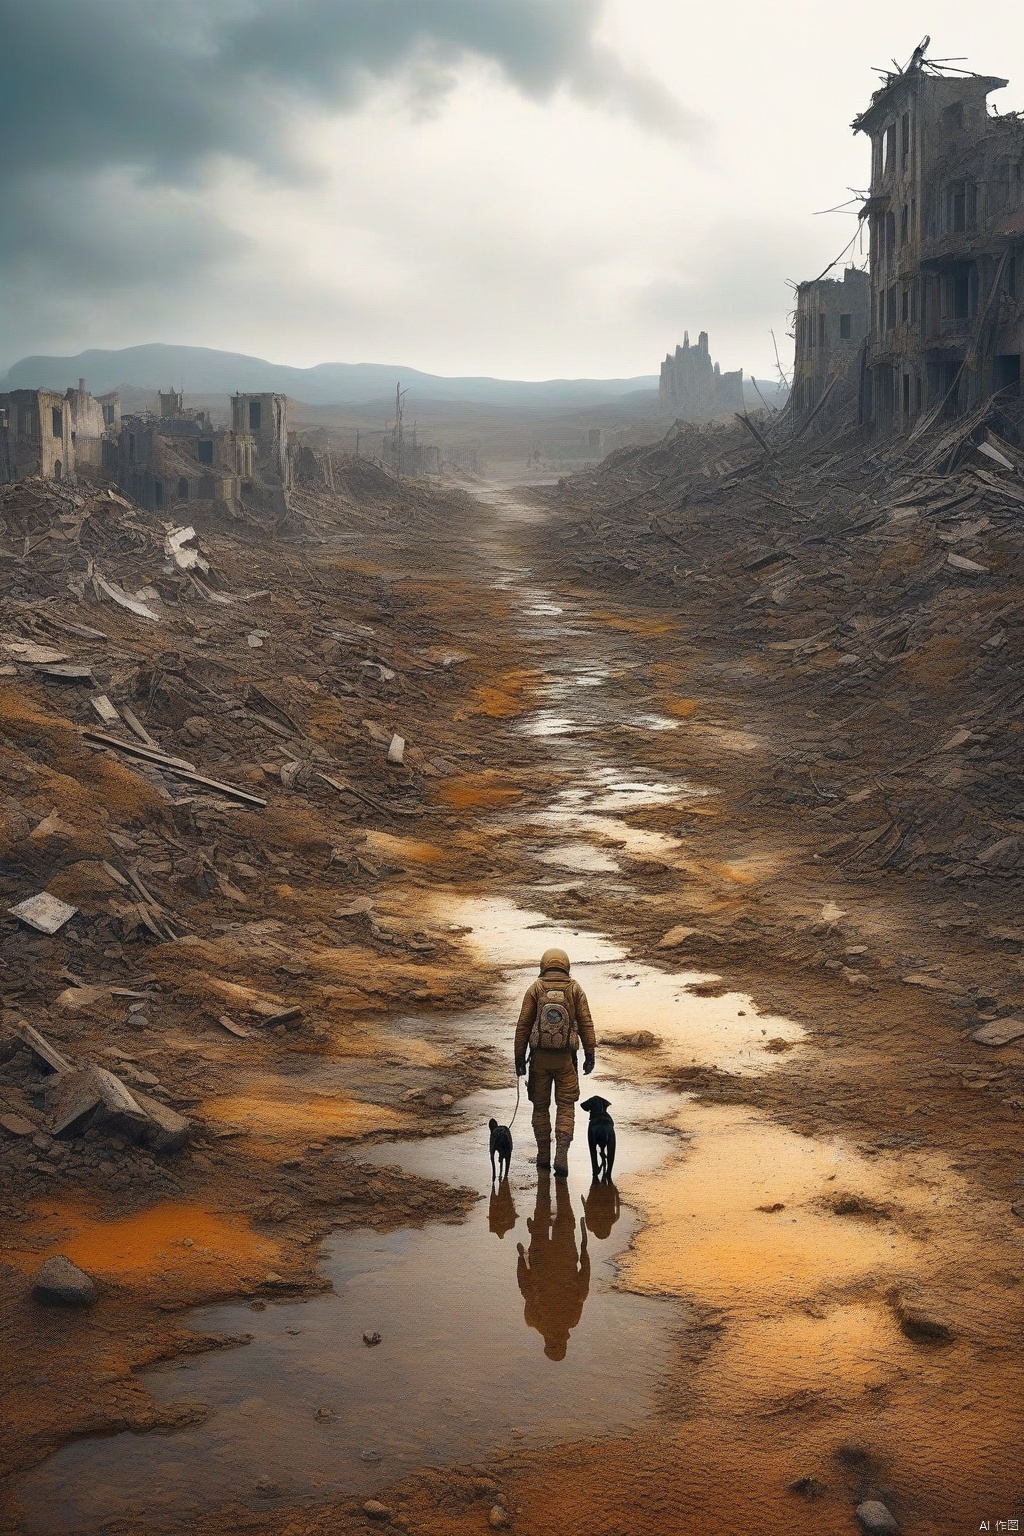 8k,RAW photo,best quality,masterpiece,ultra high res,ultra detailed,illustration,close up,astonaut,environment only,Post-apocalyptic wasteland,third person,a lonely male with a dog standing on a road amidst the ruins